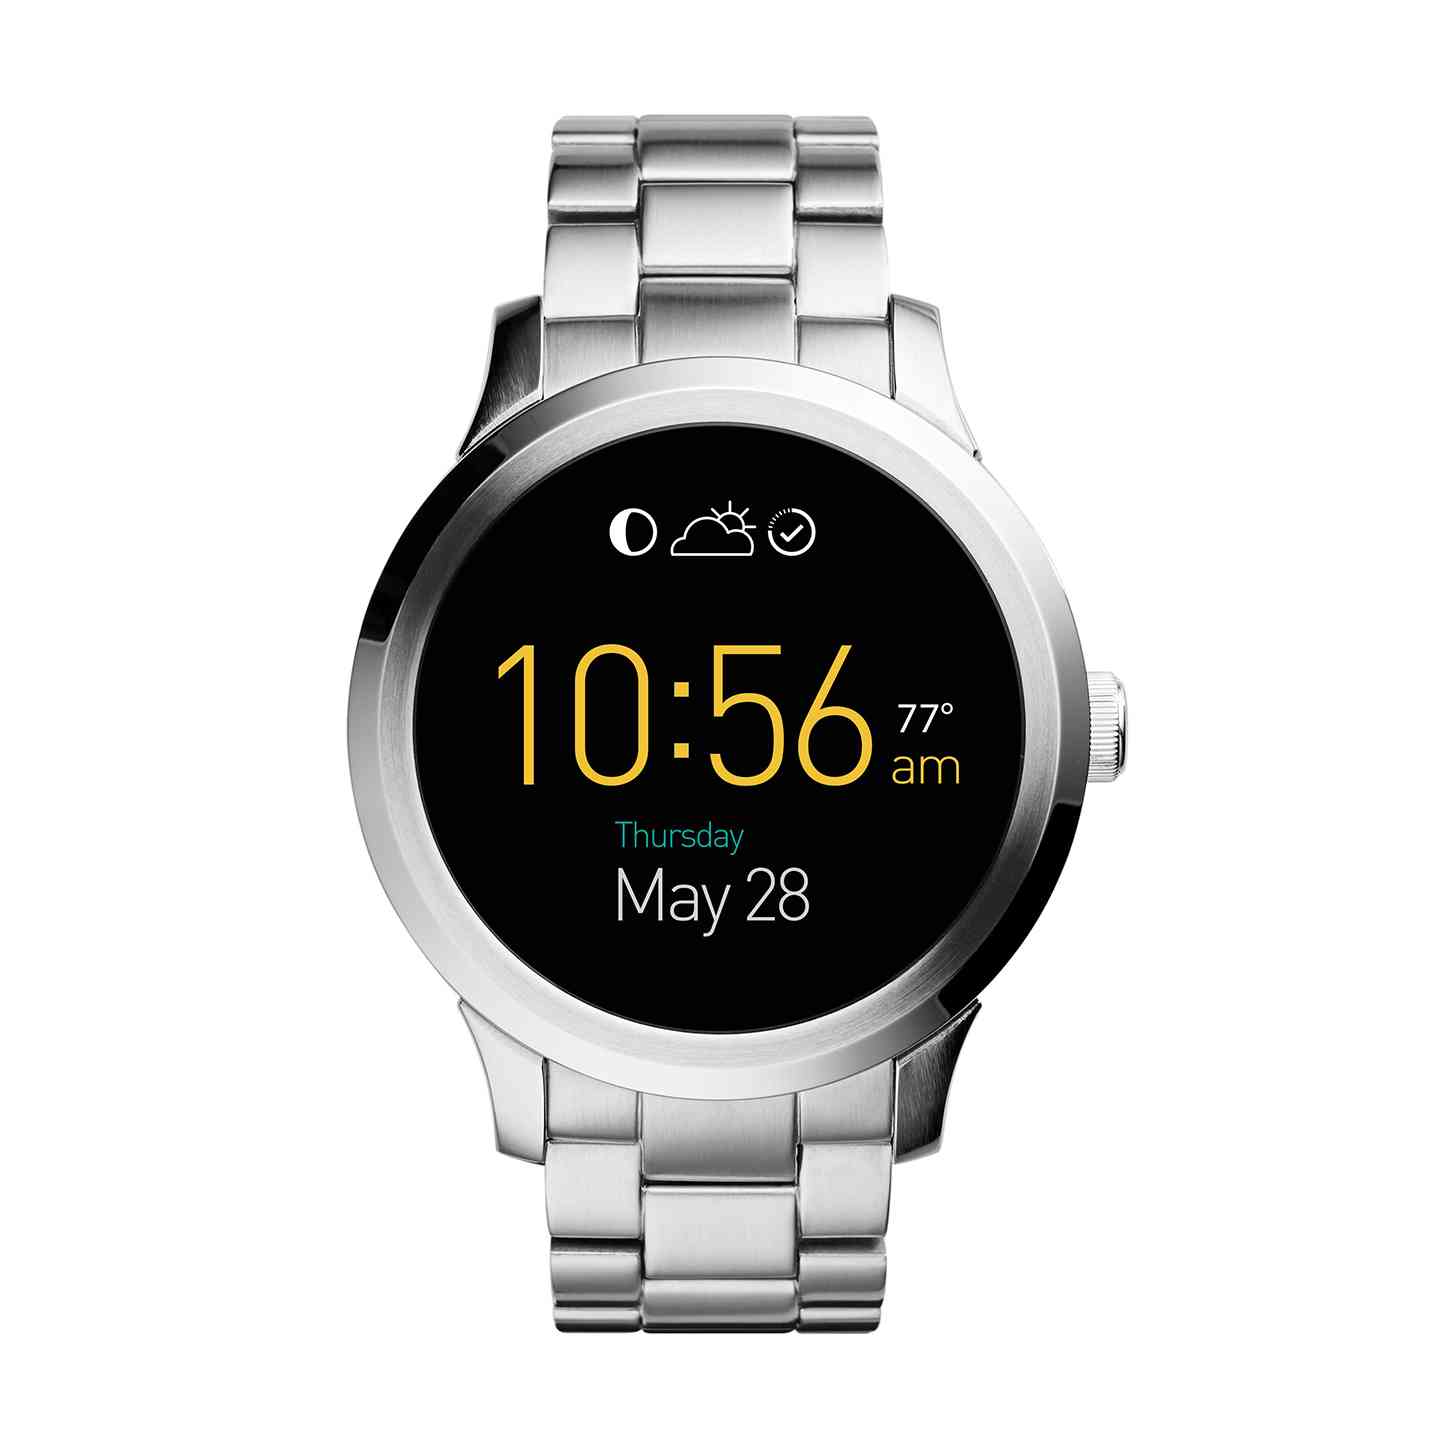 Fossil Q Founder Android Wear smartwatch large